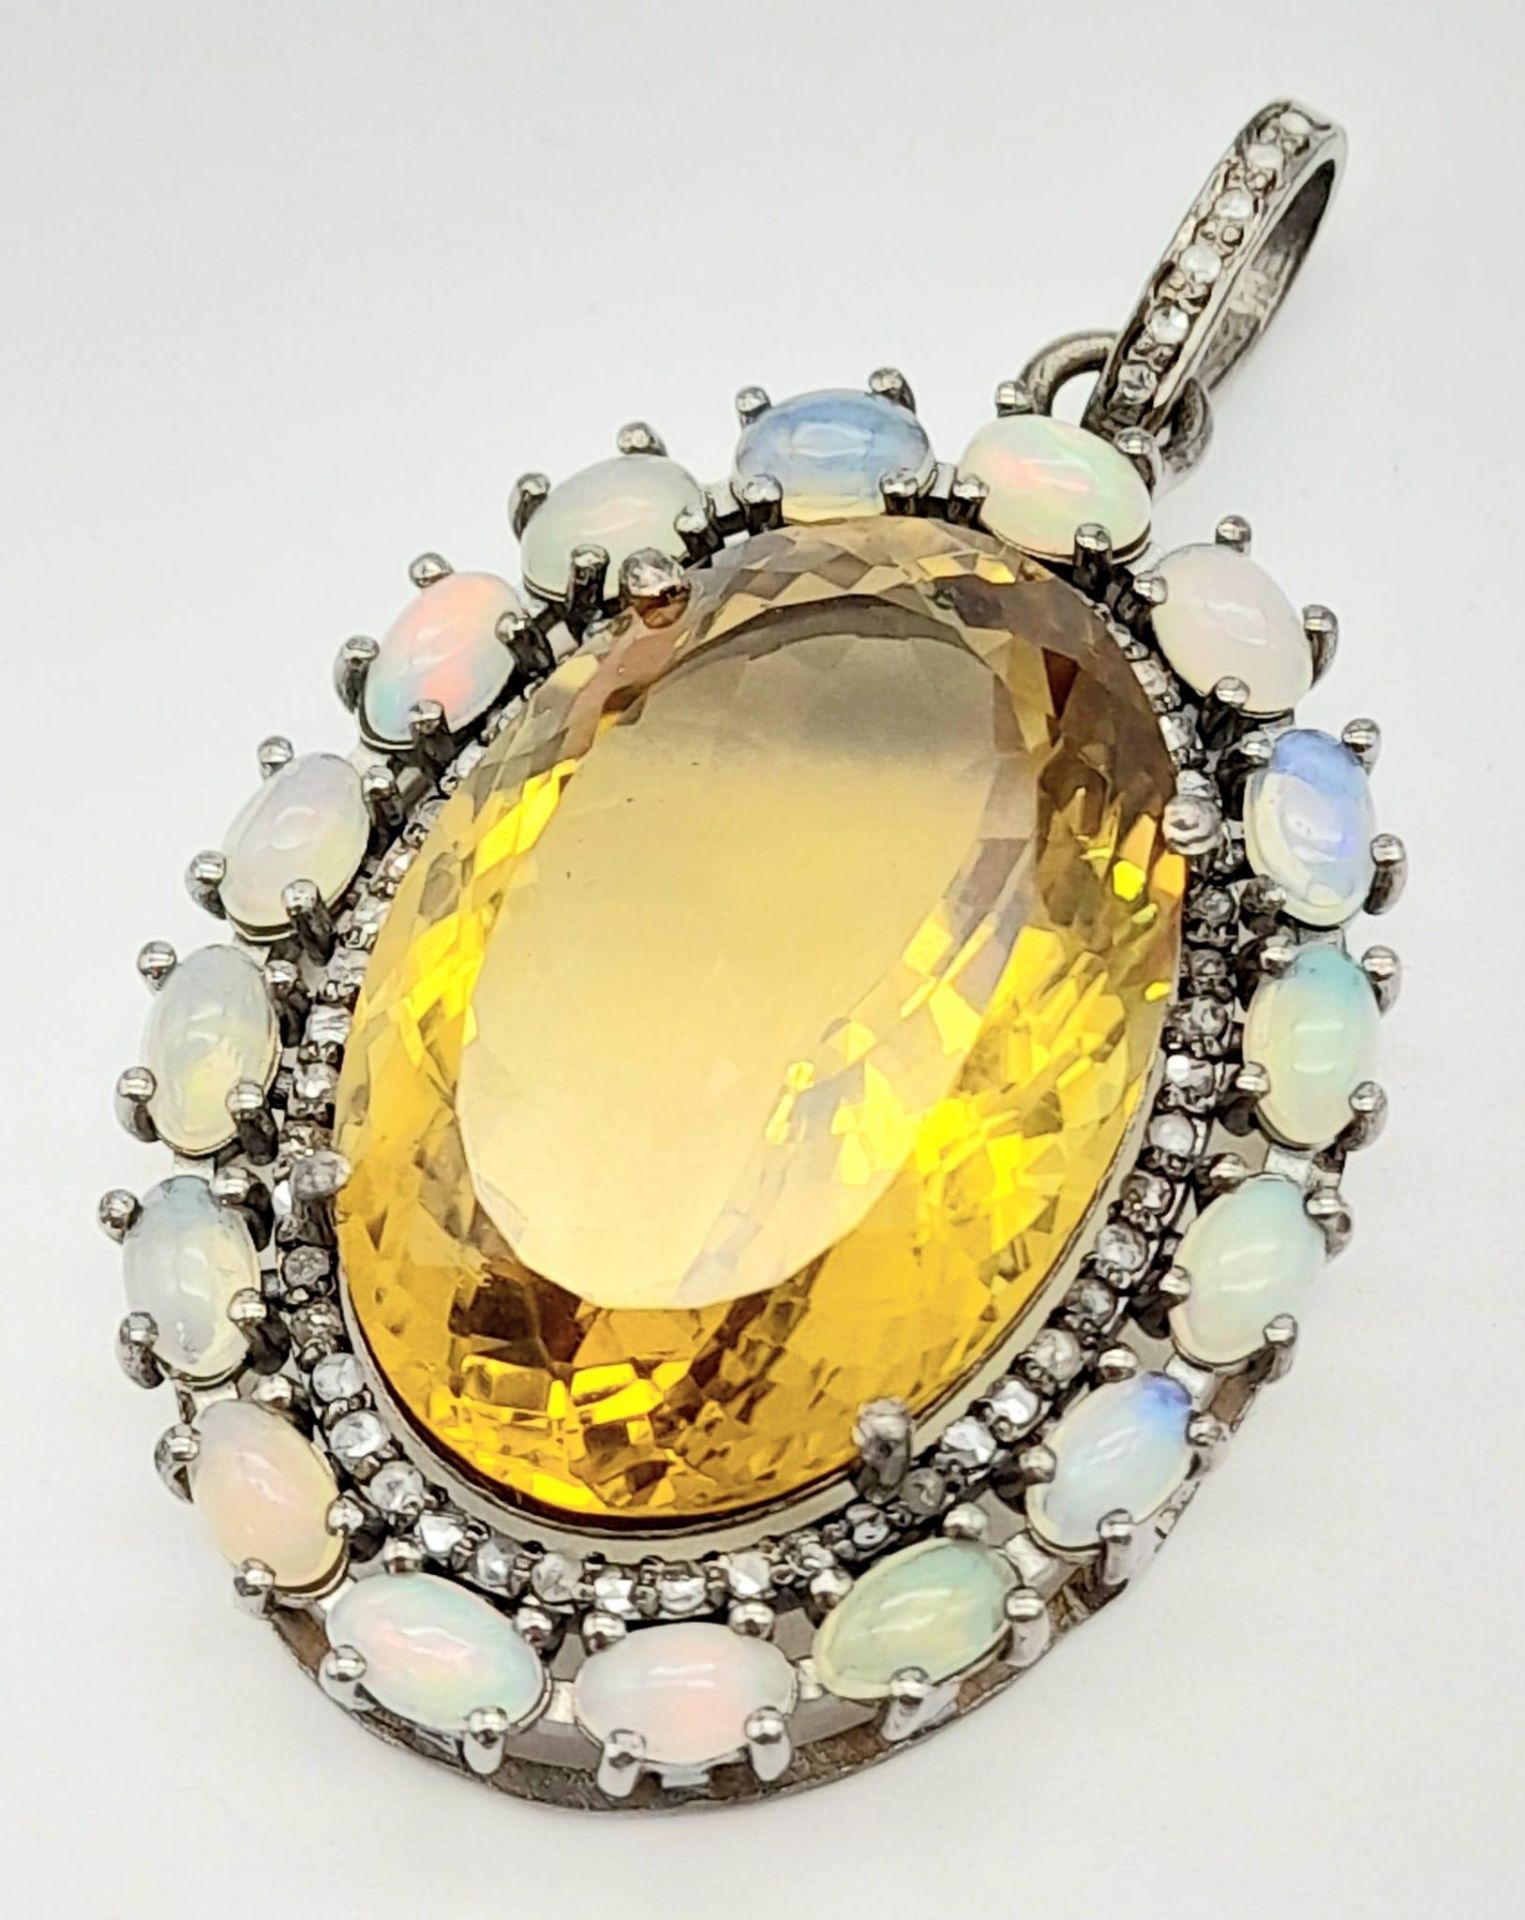 A Citrine, Opal and Diamond Pendant set in 925 Sterling Silver. 29.95ct of gems and 0.60ct diamond